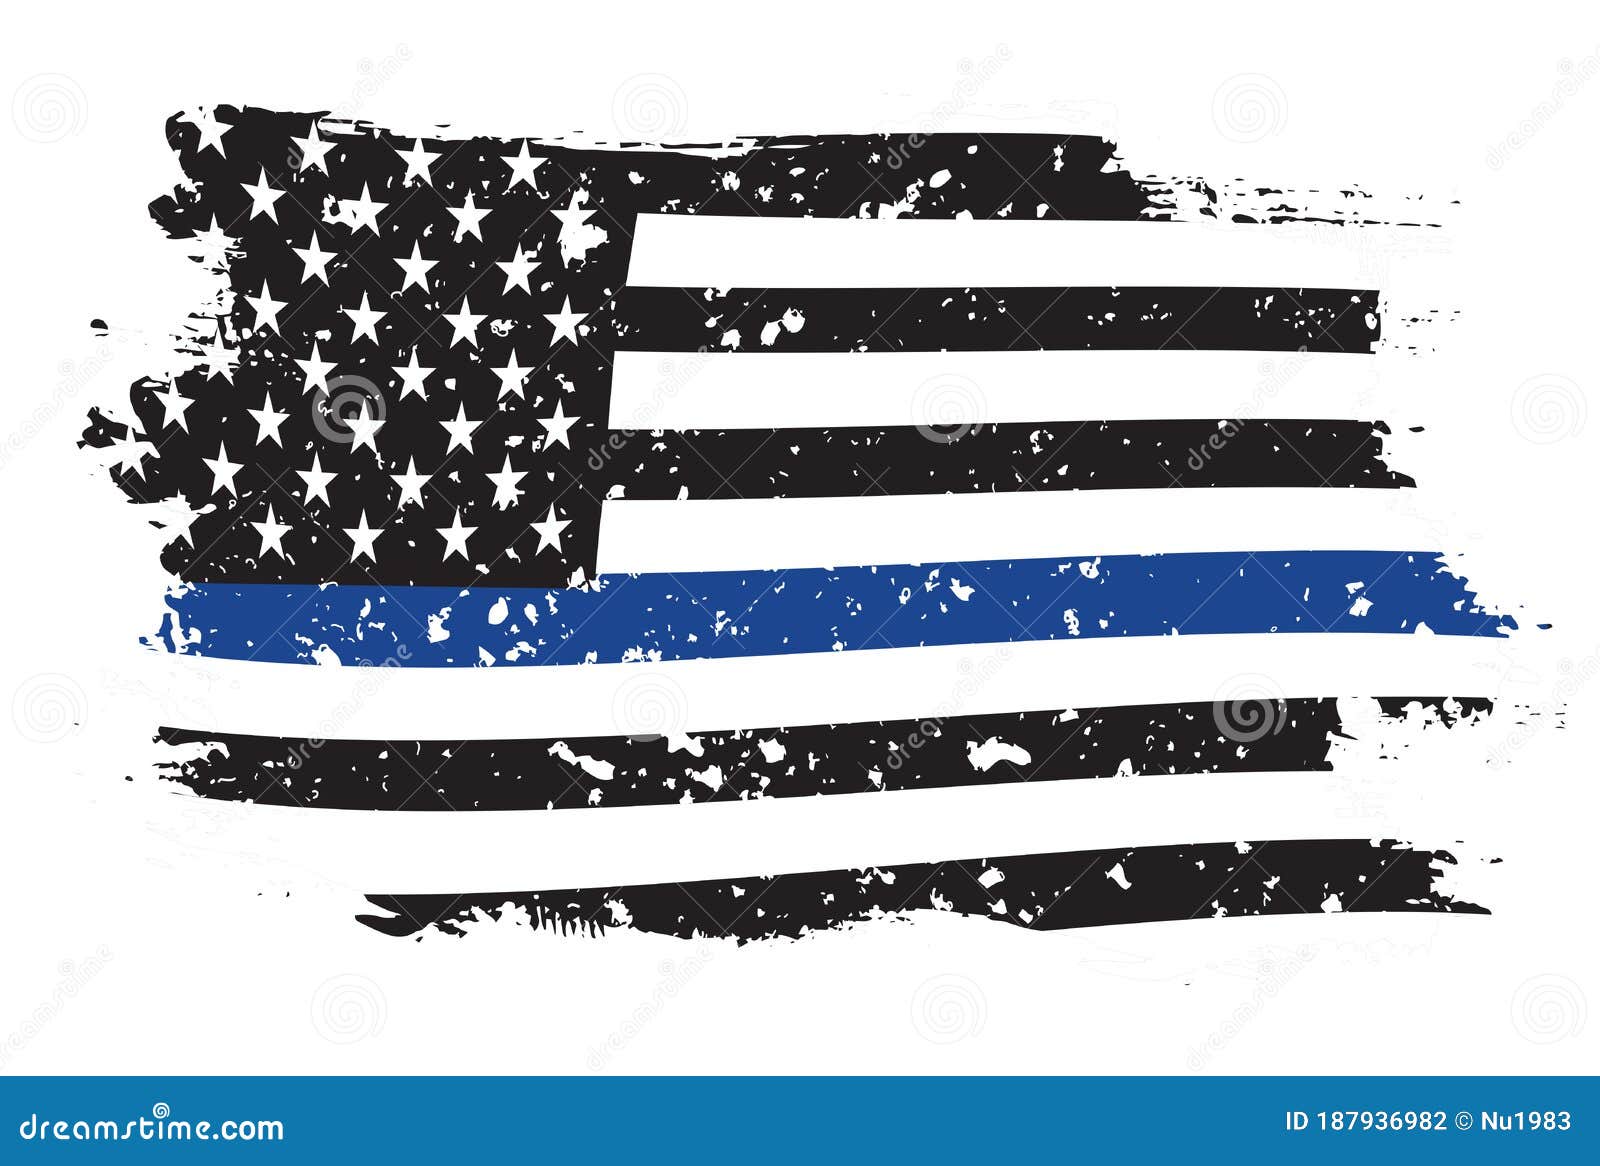 an american flag ic of support for law enforcement